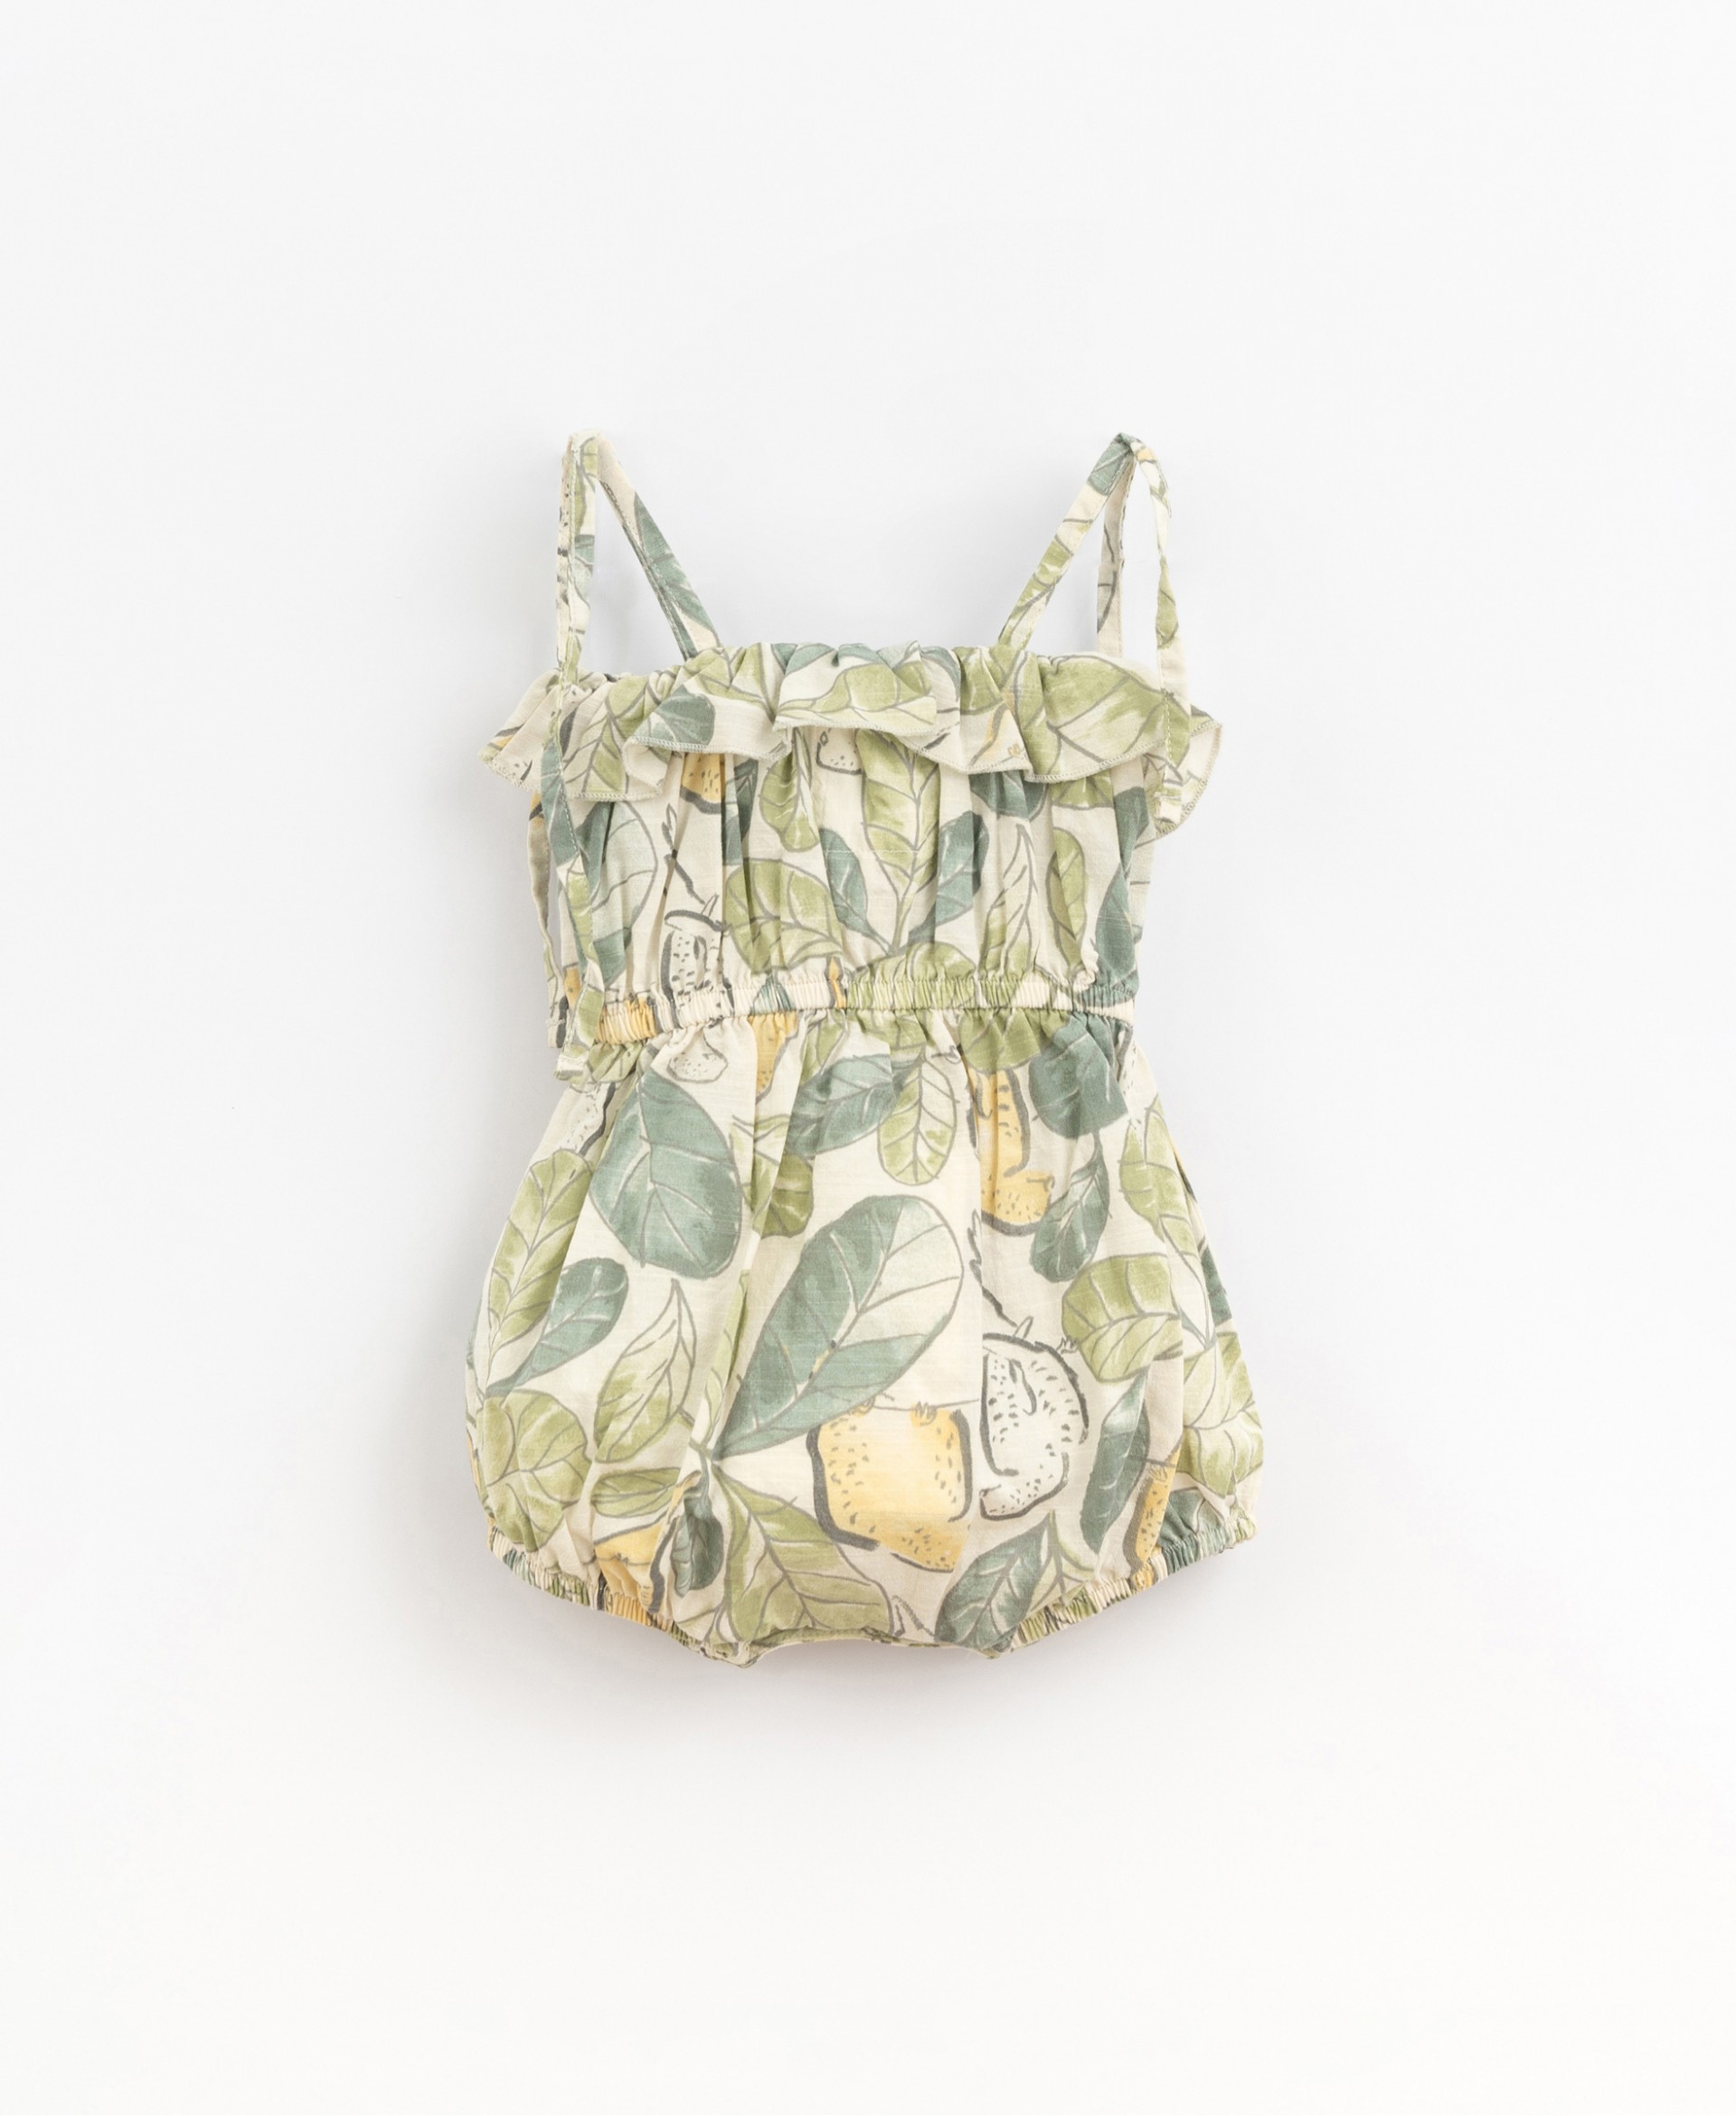 Jumpsuit in fabric printed with parakeets | Basketry